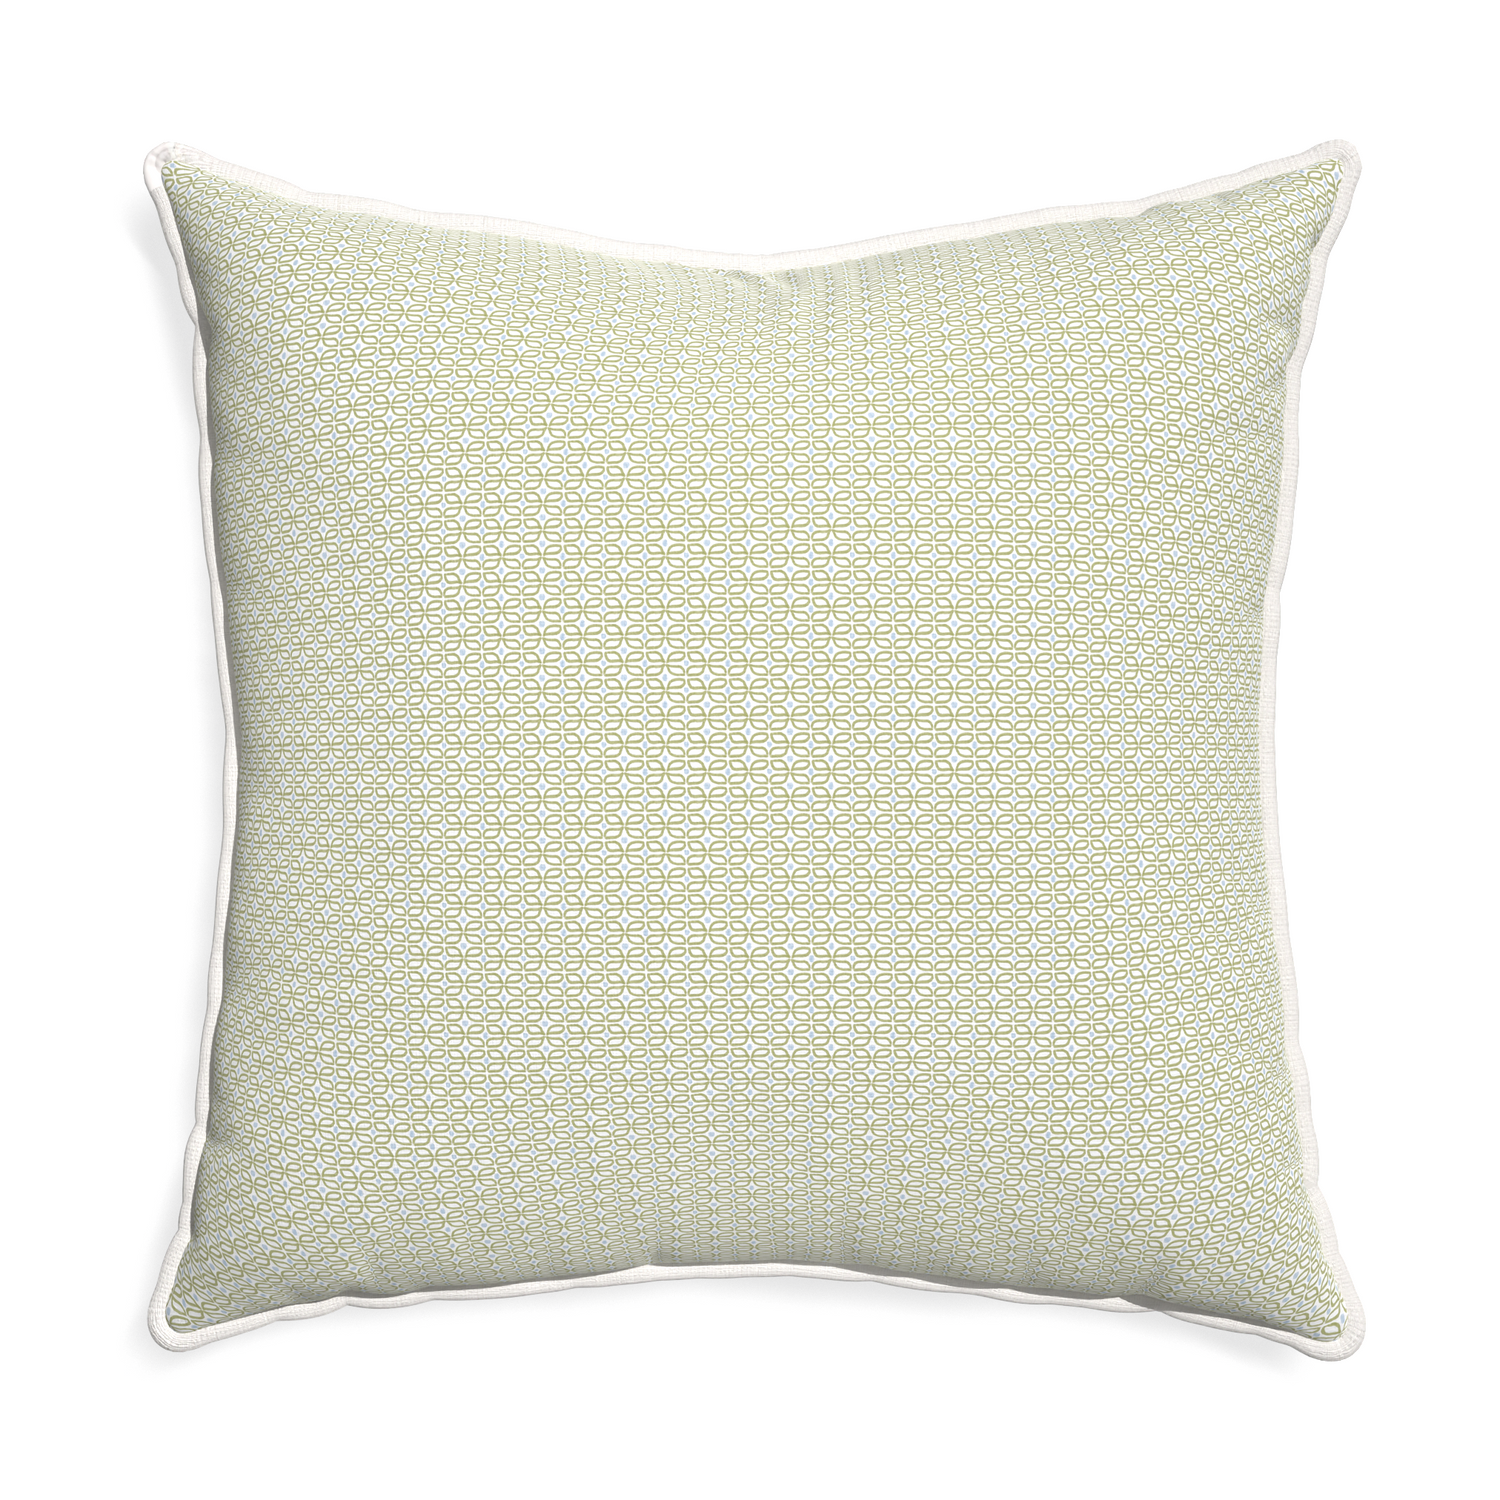 Euro-sham loomi moss custom pillow with snow piping on white background